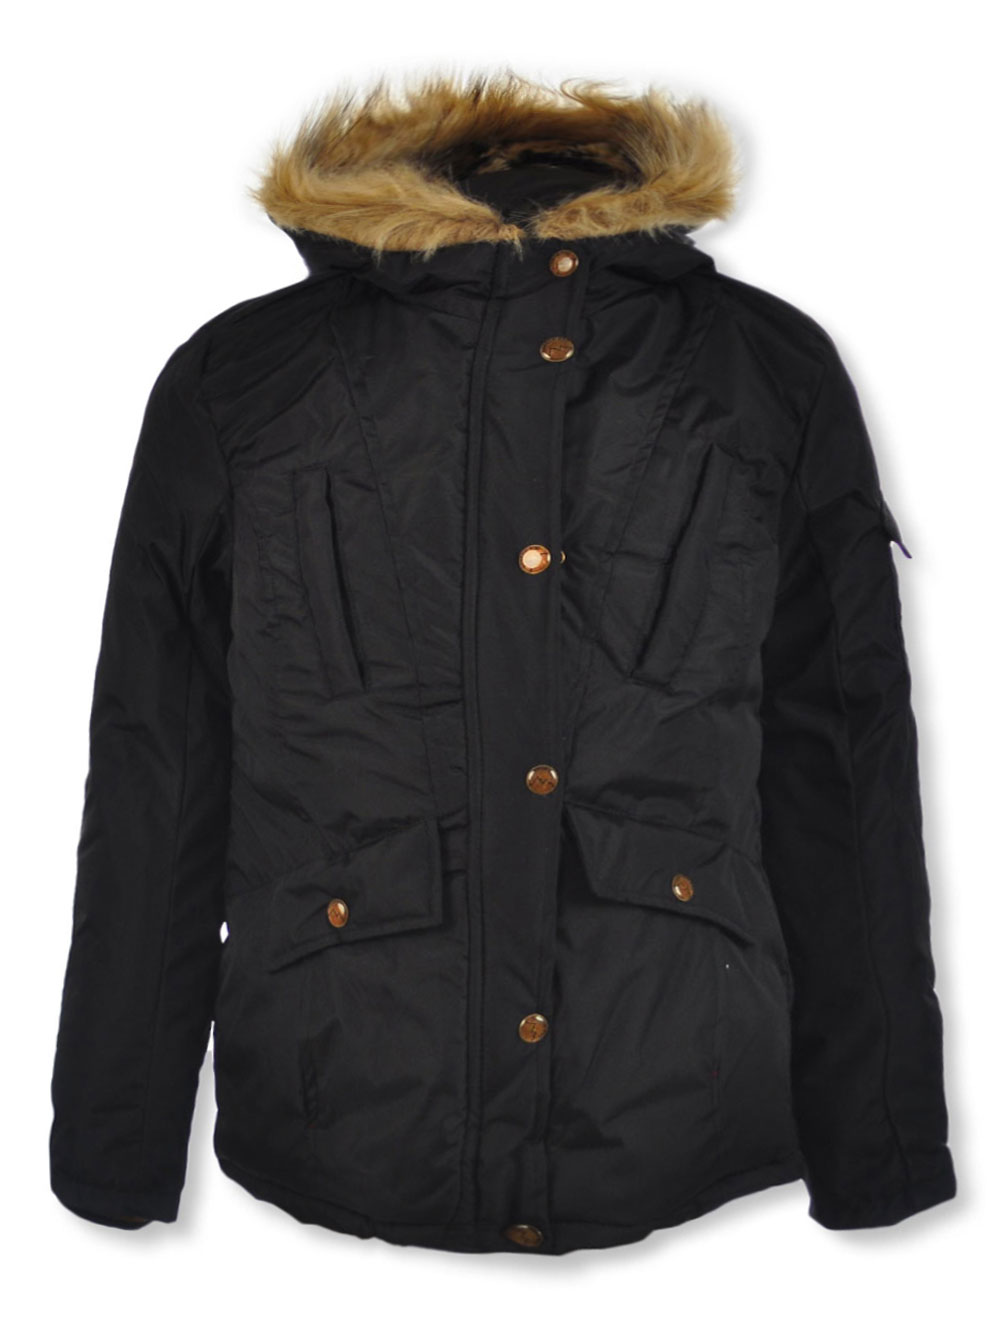 Girls' Insulated Hooded Jacket